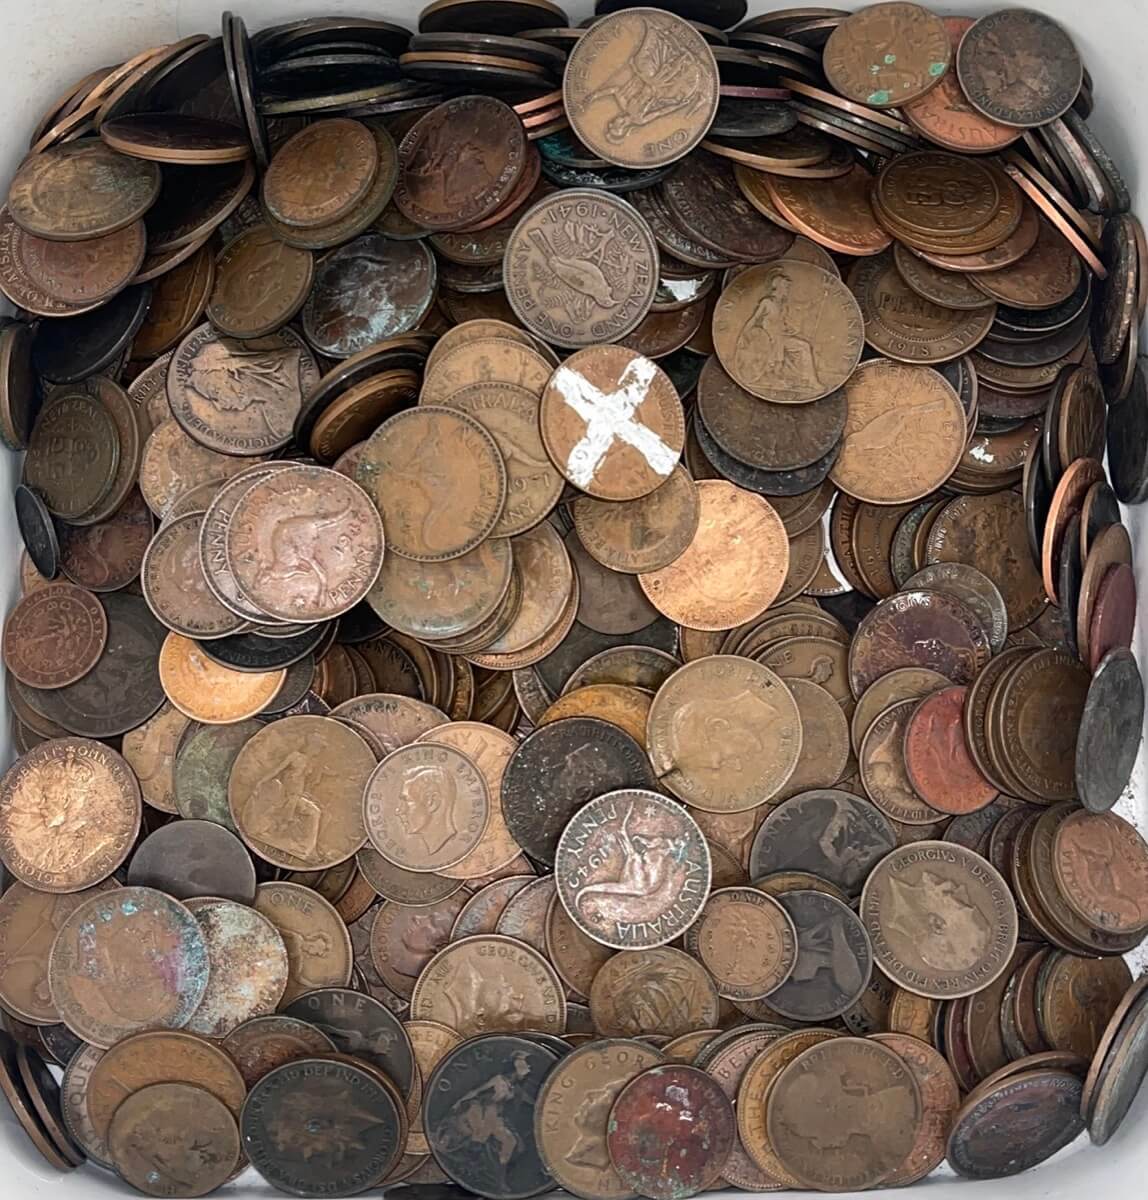 Bulk Lot of 3kg in Commonwealth Copper Coins product image